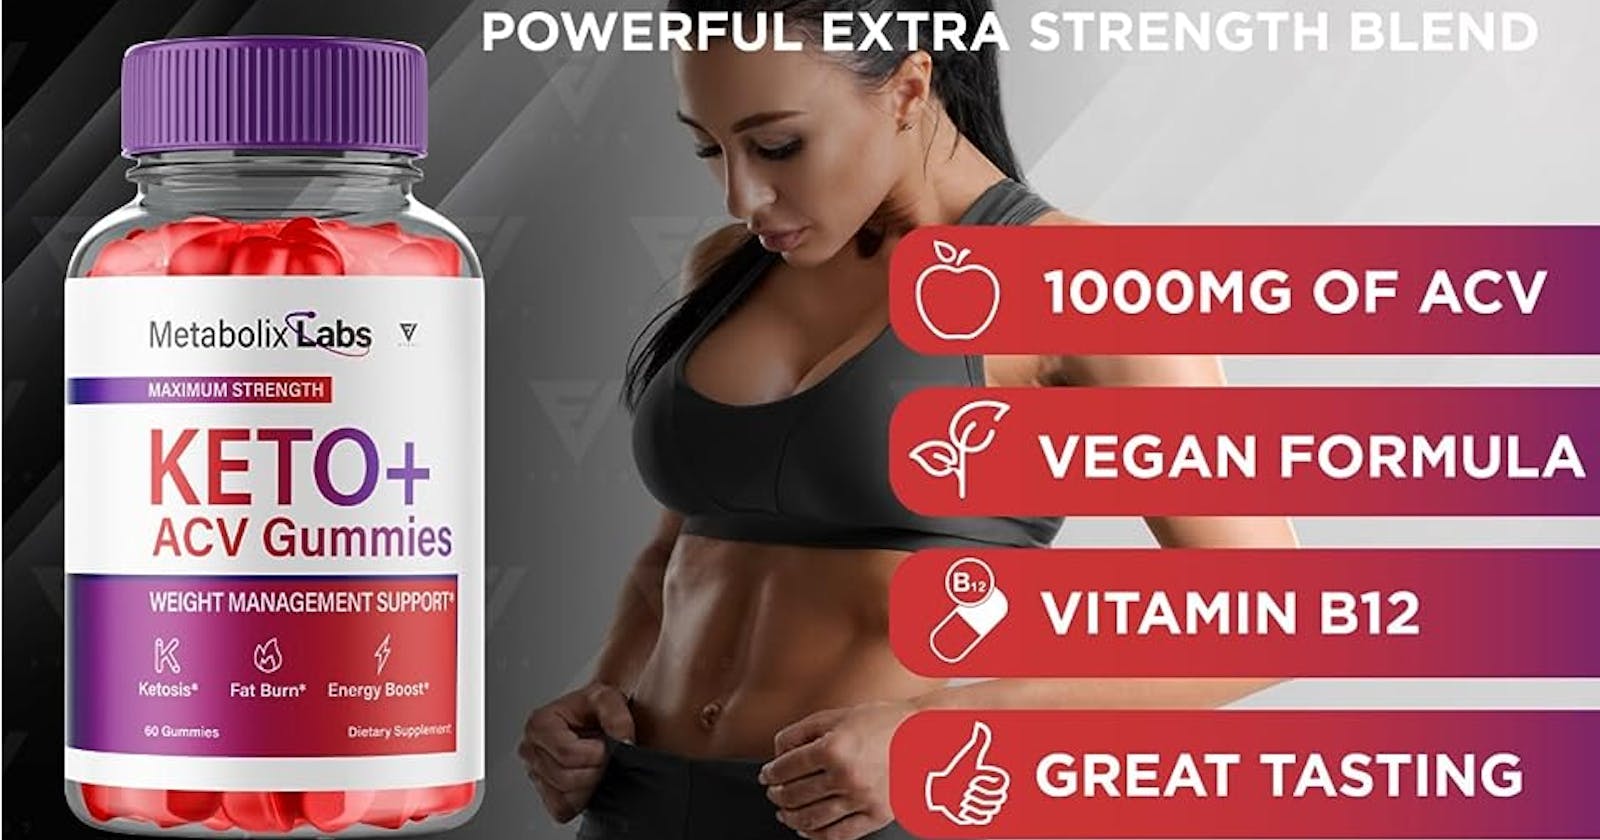 Metabolix Keto ACV Gummies most popular weight loss pills and supplements